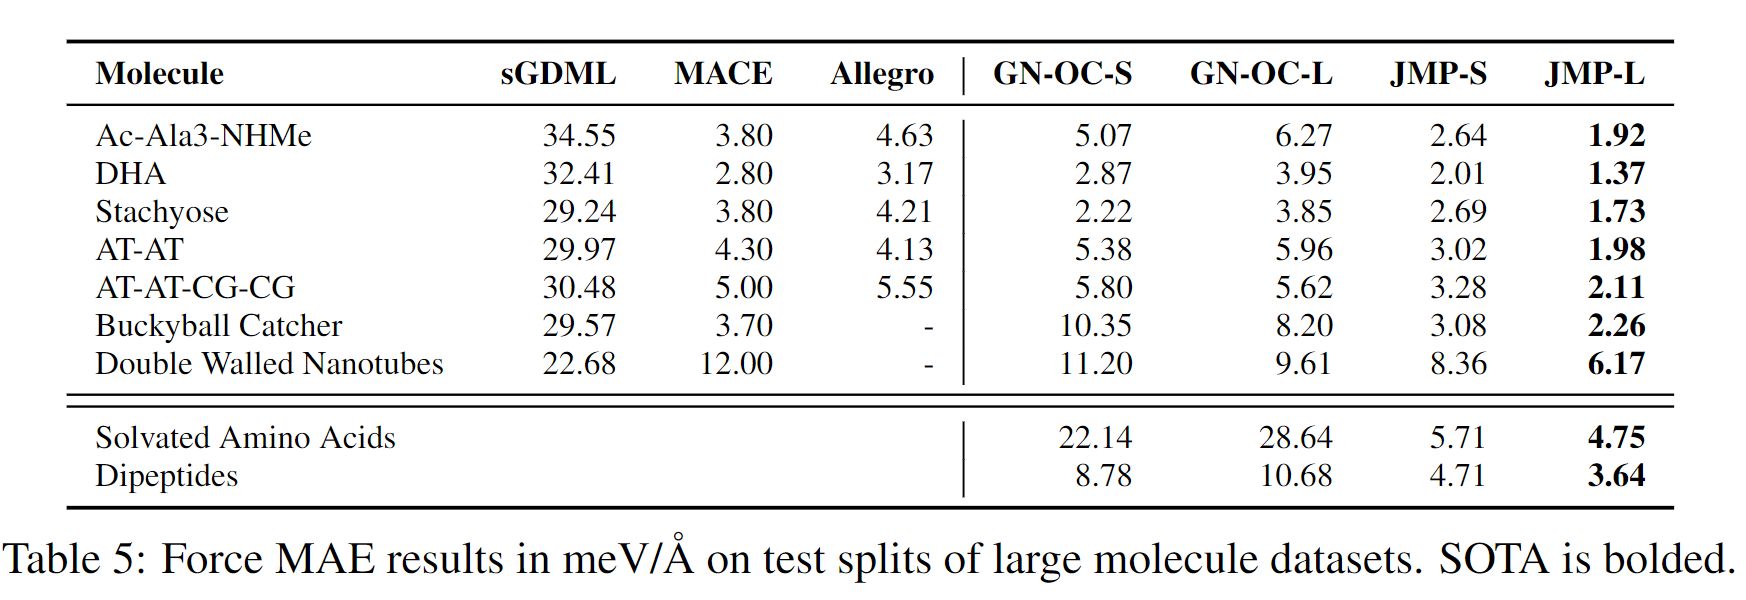 JMP results on the MD22 and SPICE large molecule benchmarks, showing state-of-the-art performance.